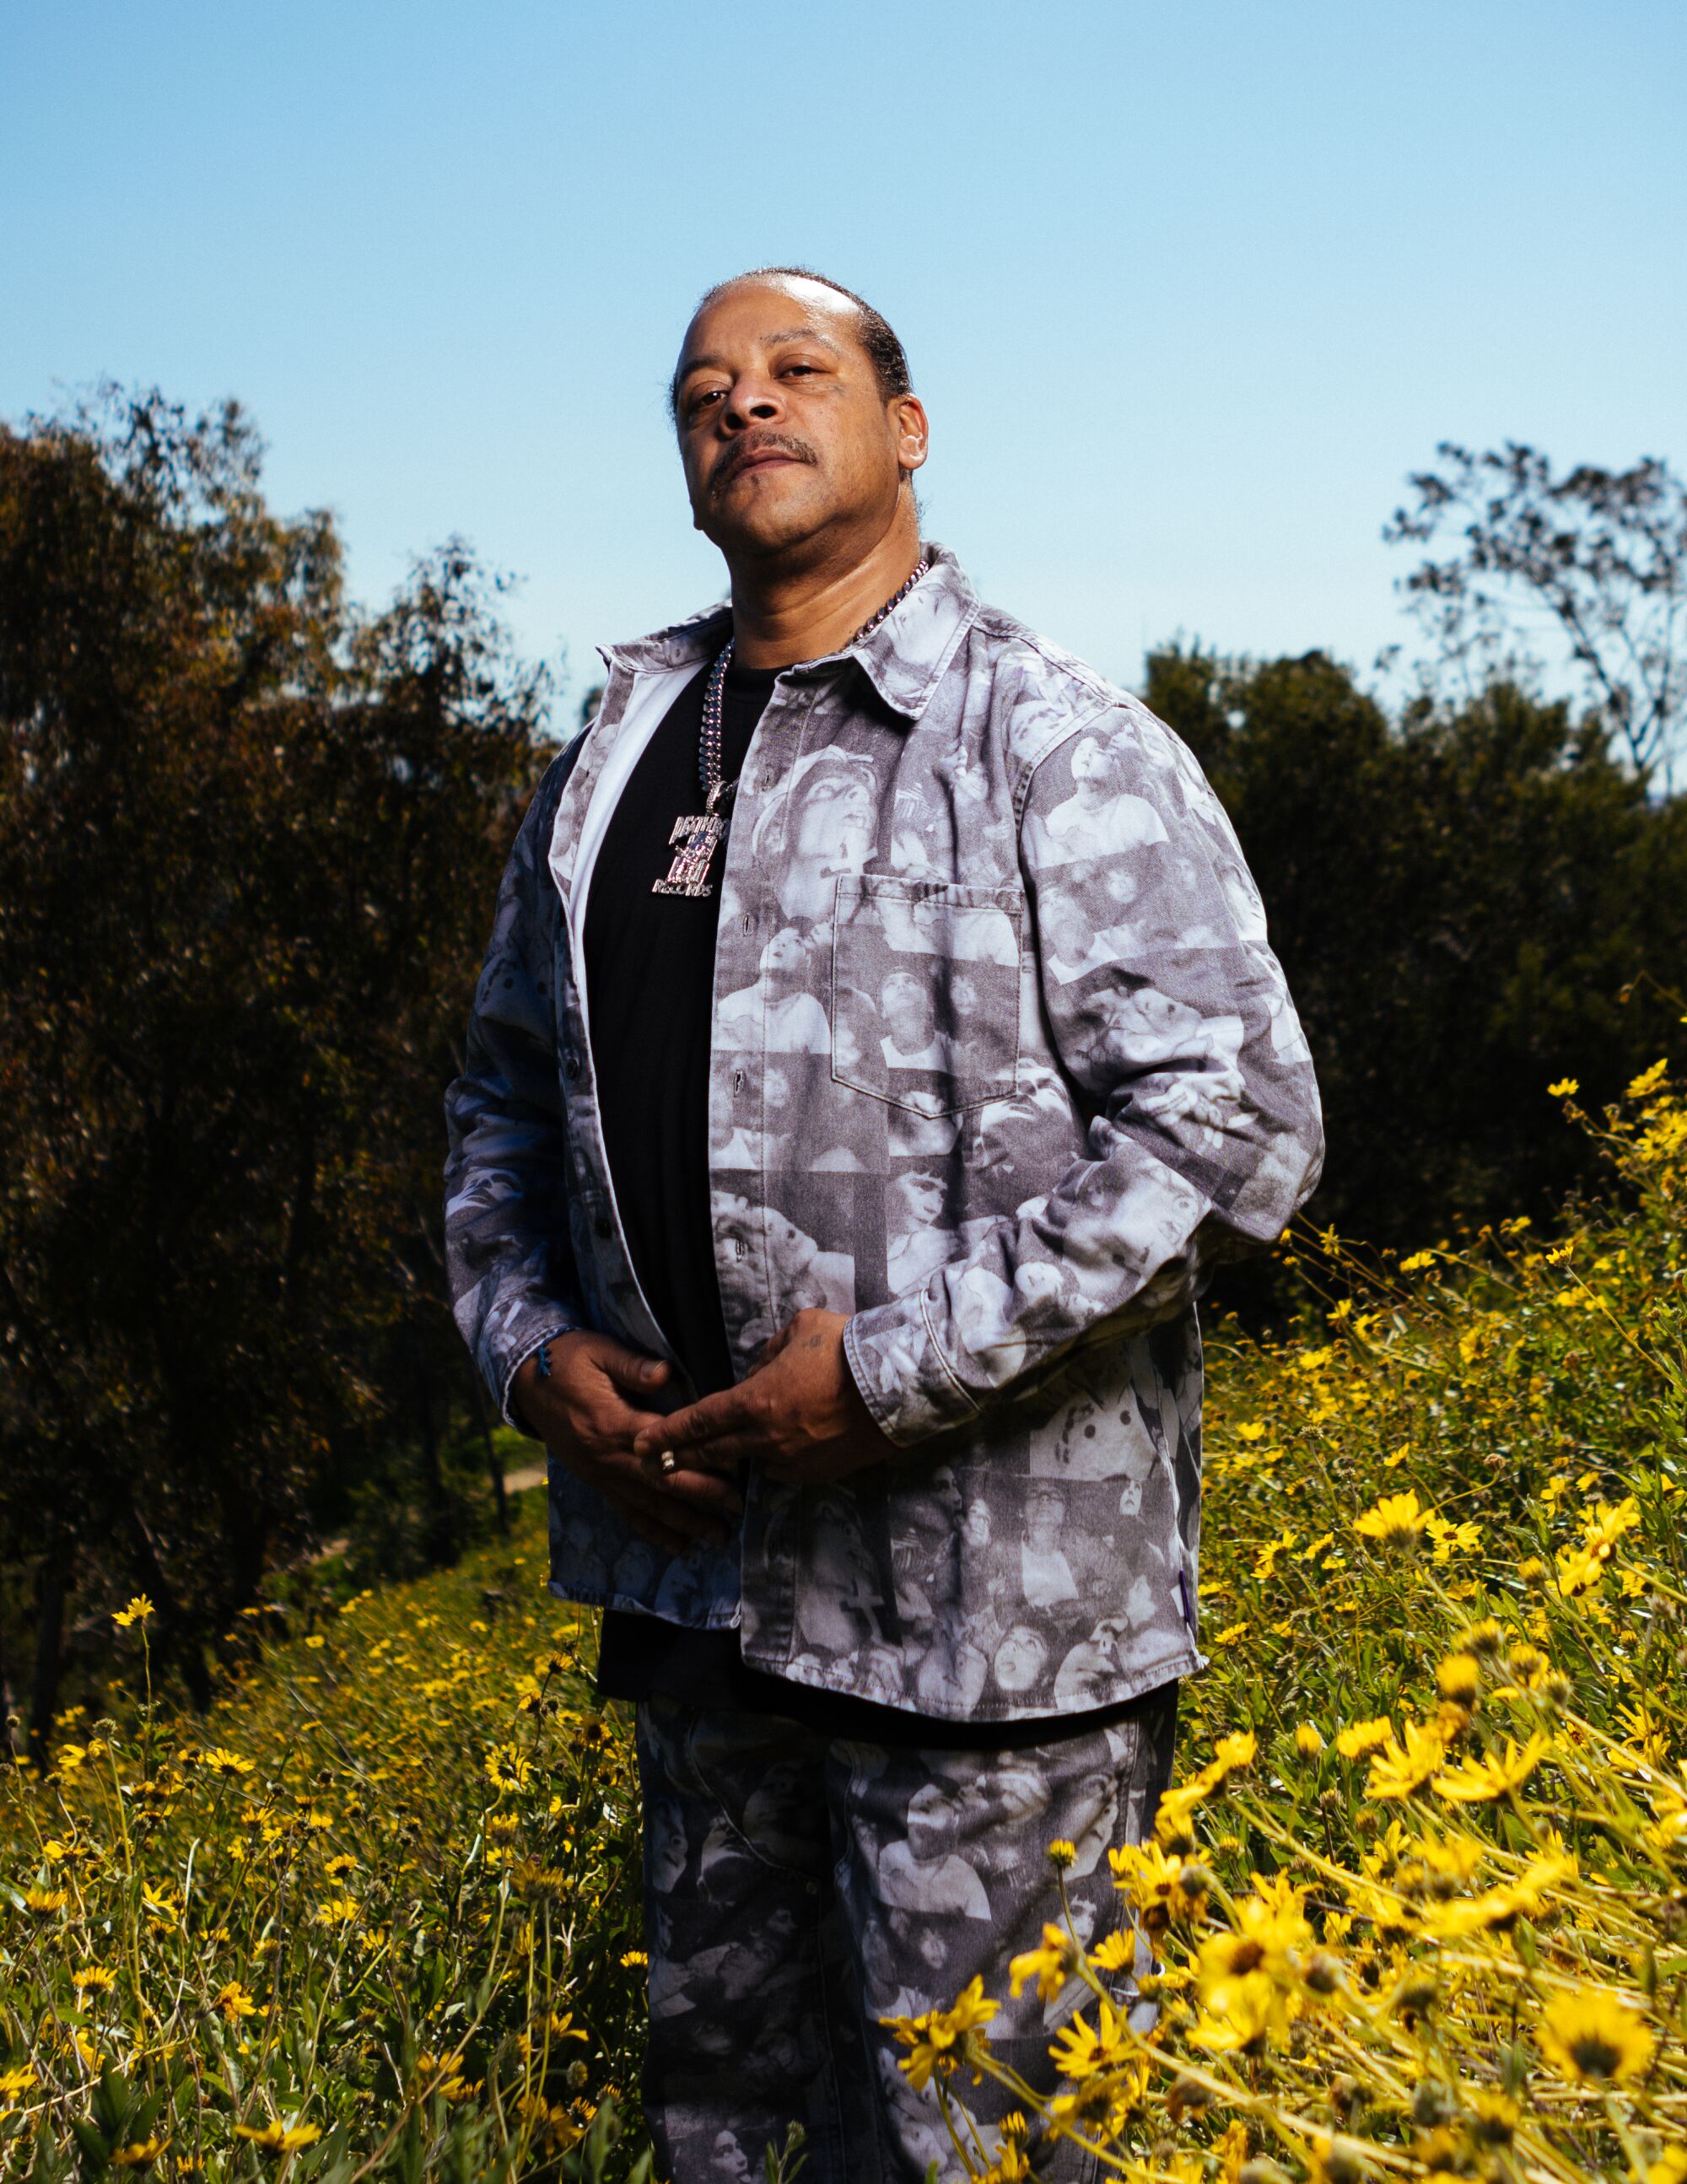 Suga Free poses in a field of flowers.